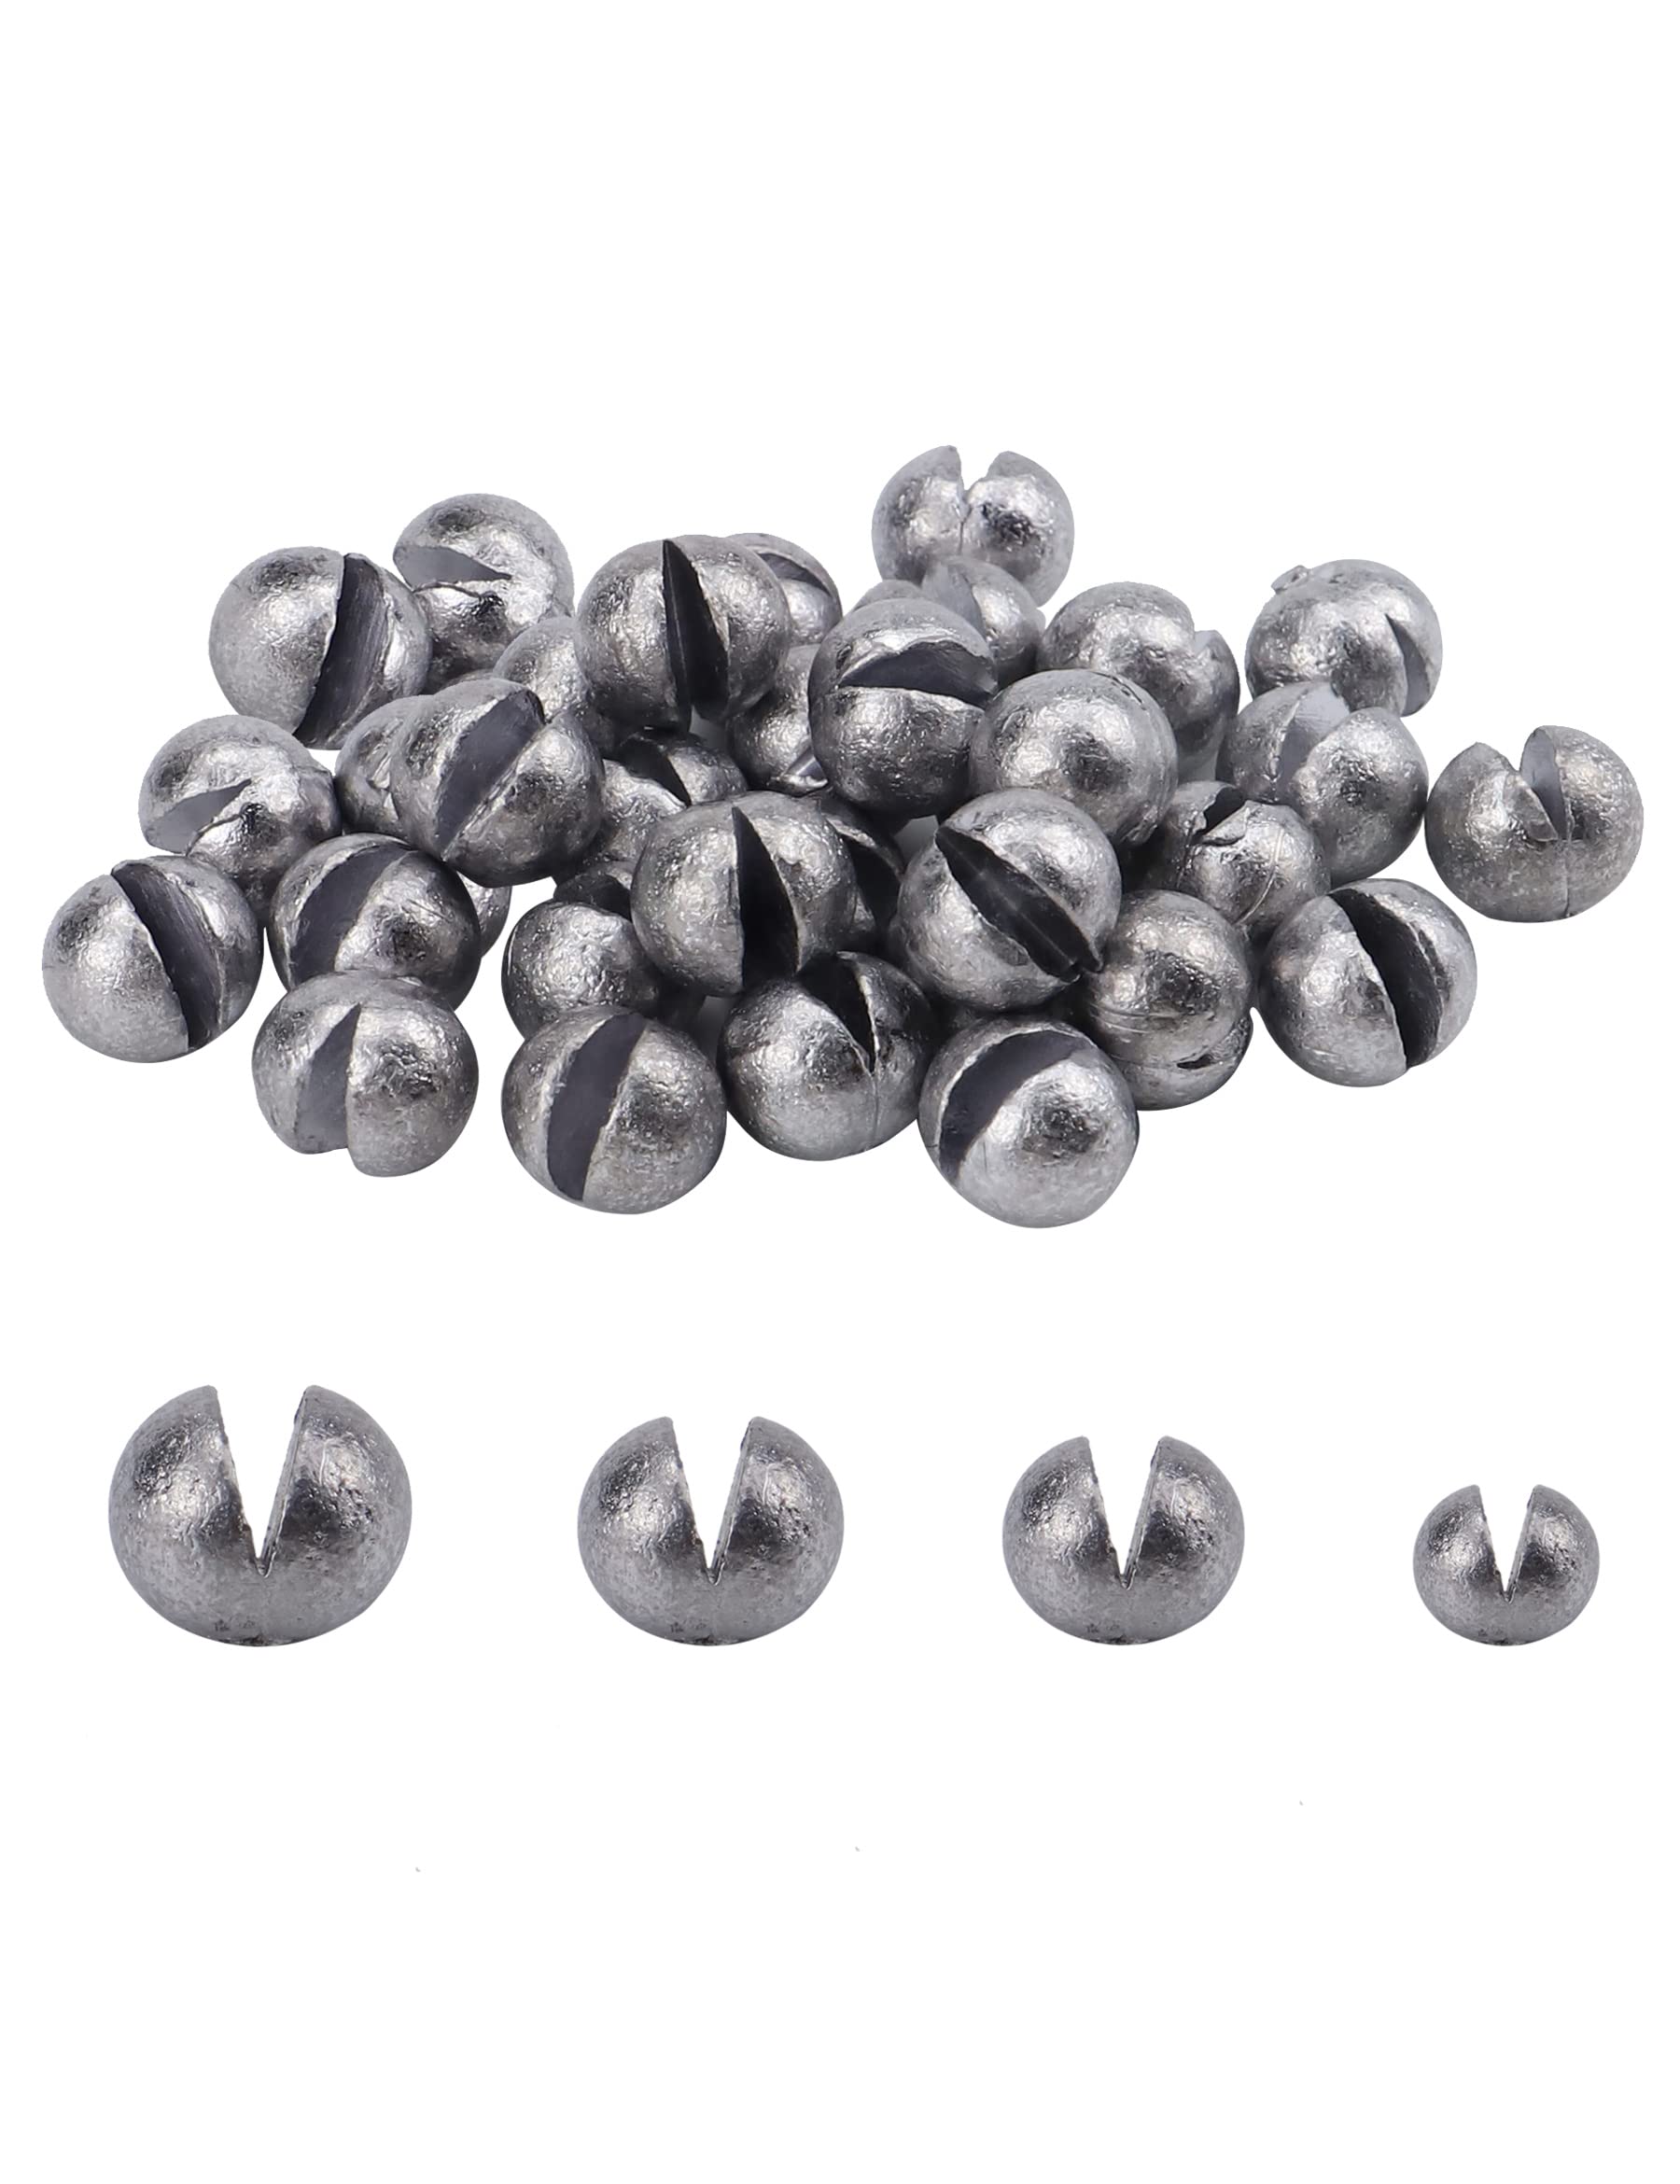 Avlcoaky Split Shot Fishing Weights 50 Pack Large Sinkers for